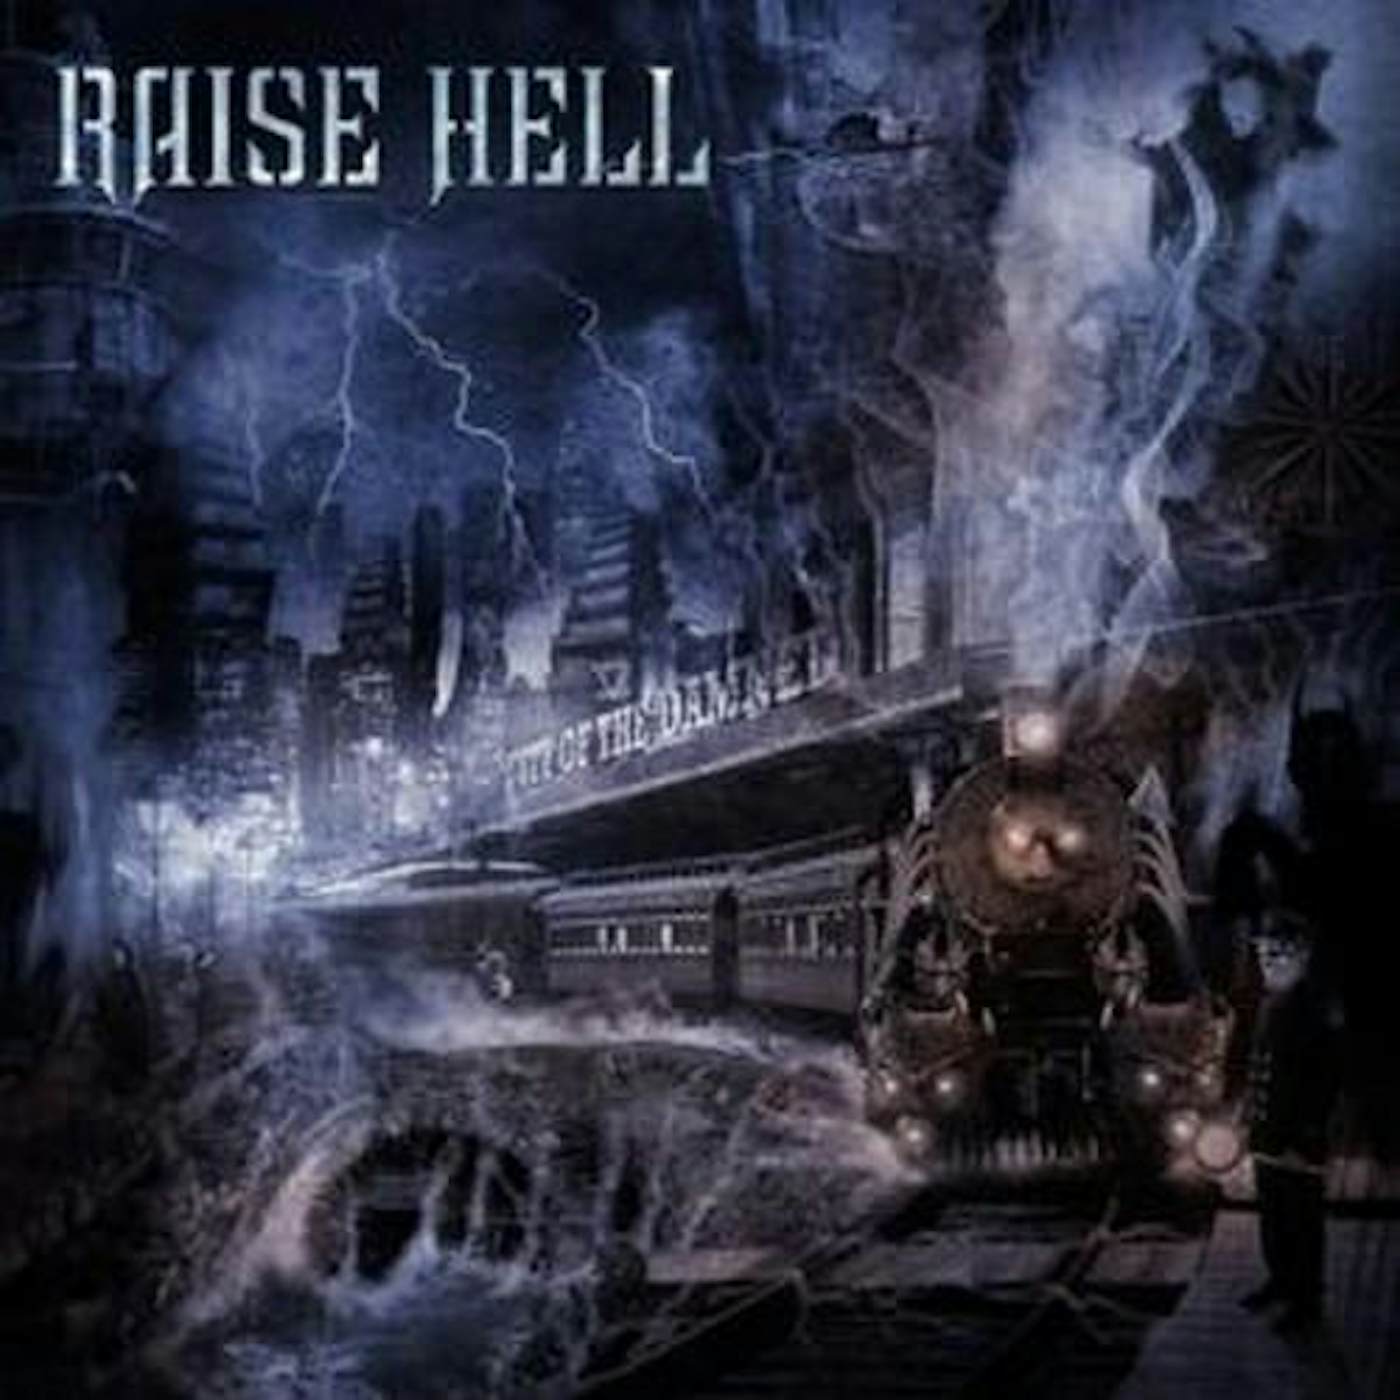 Raise Hell CITY OF THE DAMNED CD